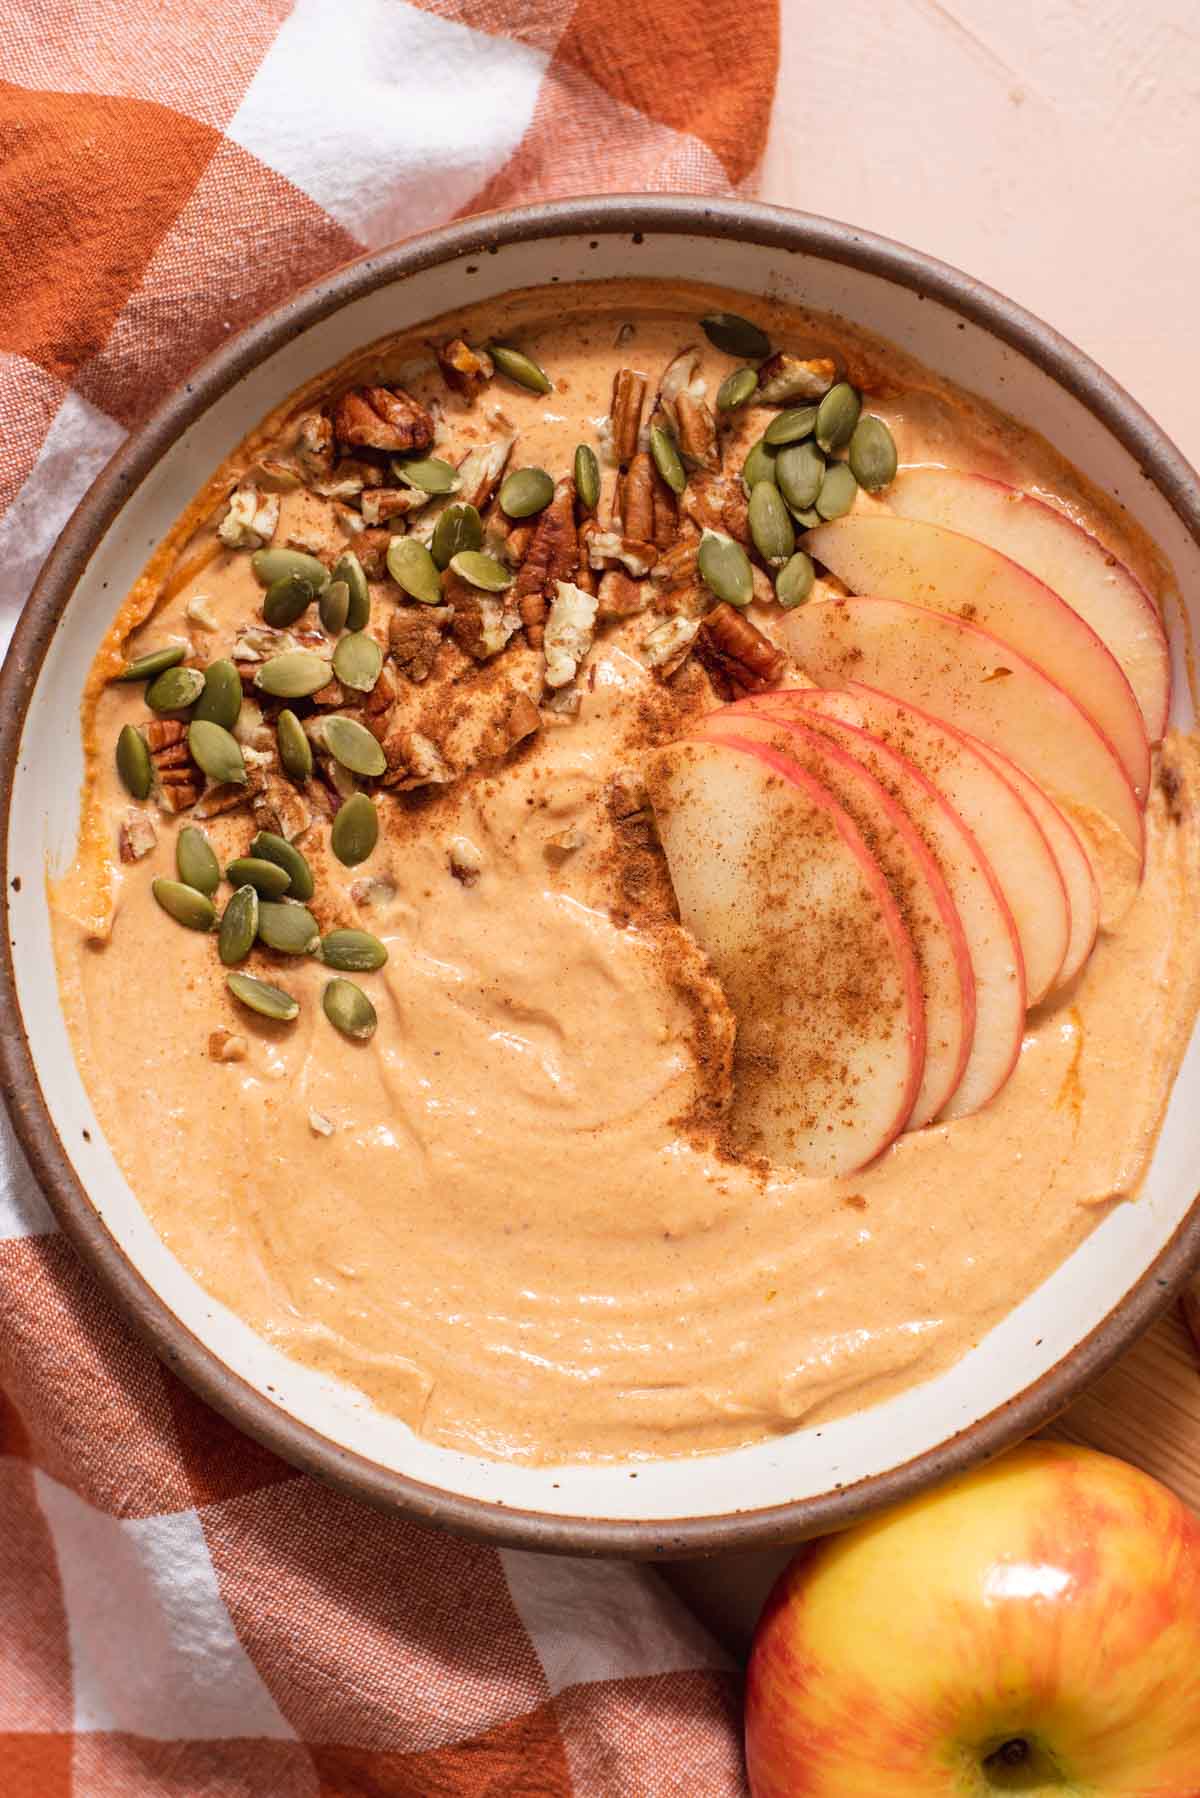 Overhead view of creamy orange dip in a white bowl with pumpkin seeds and apple slices